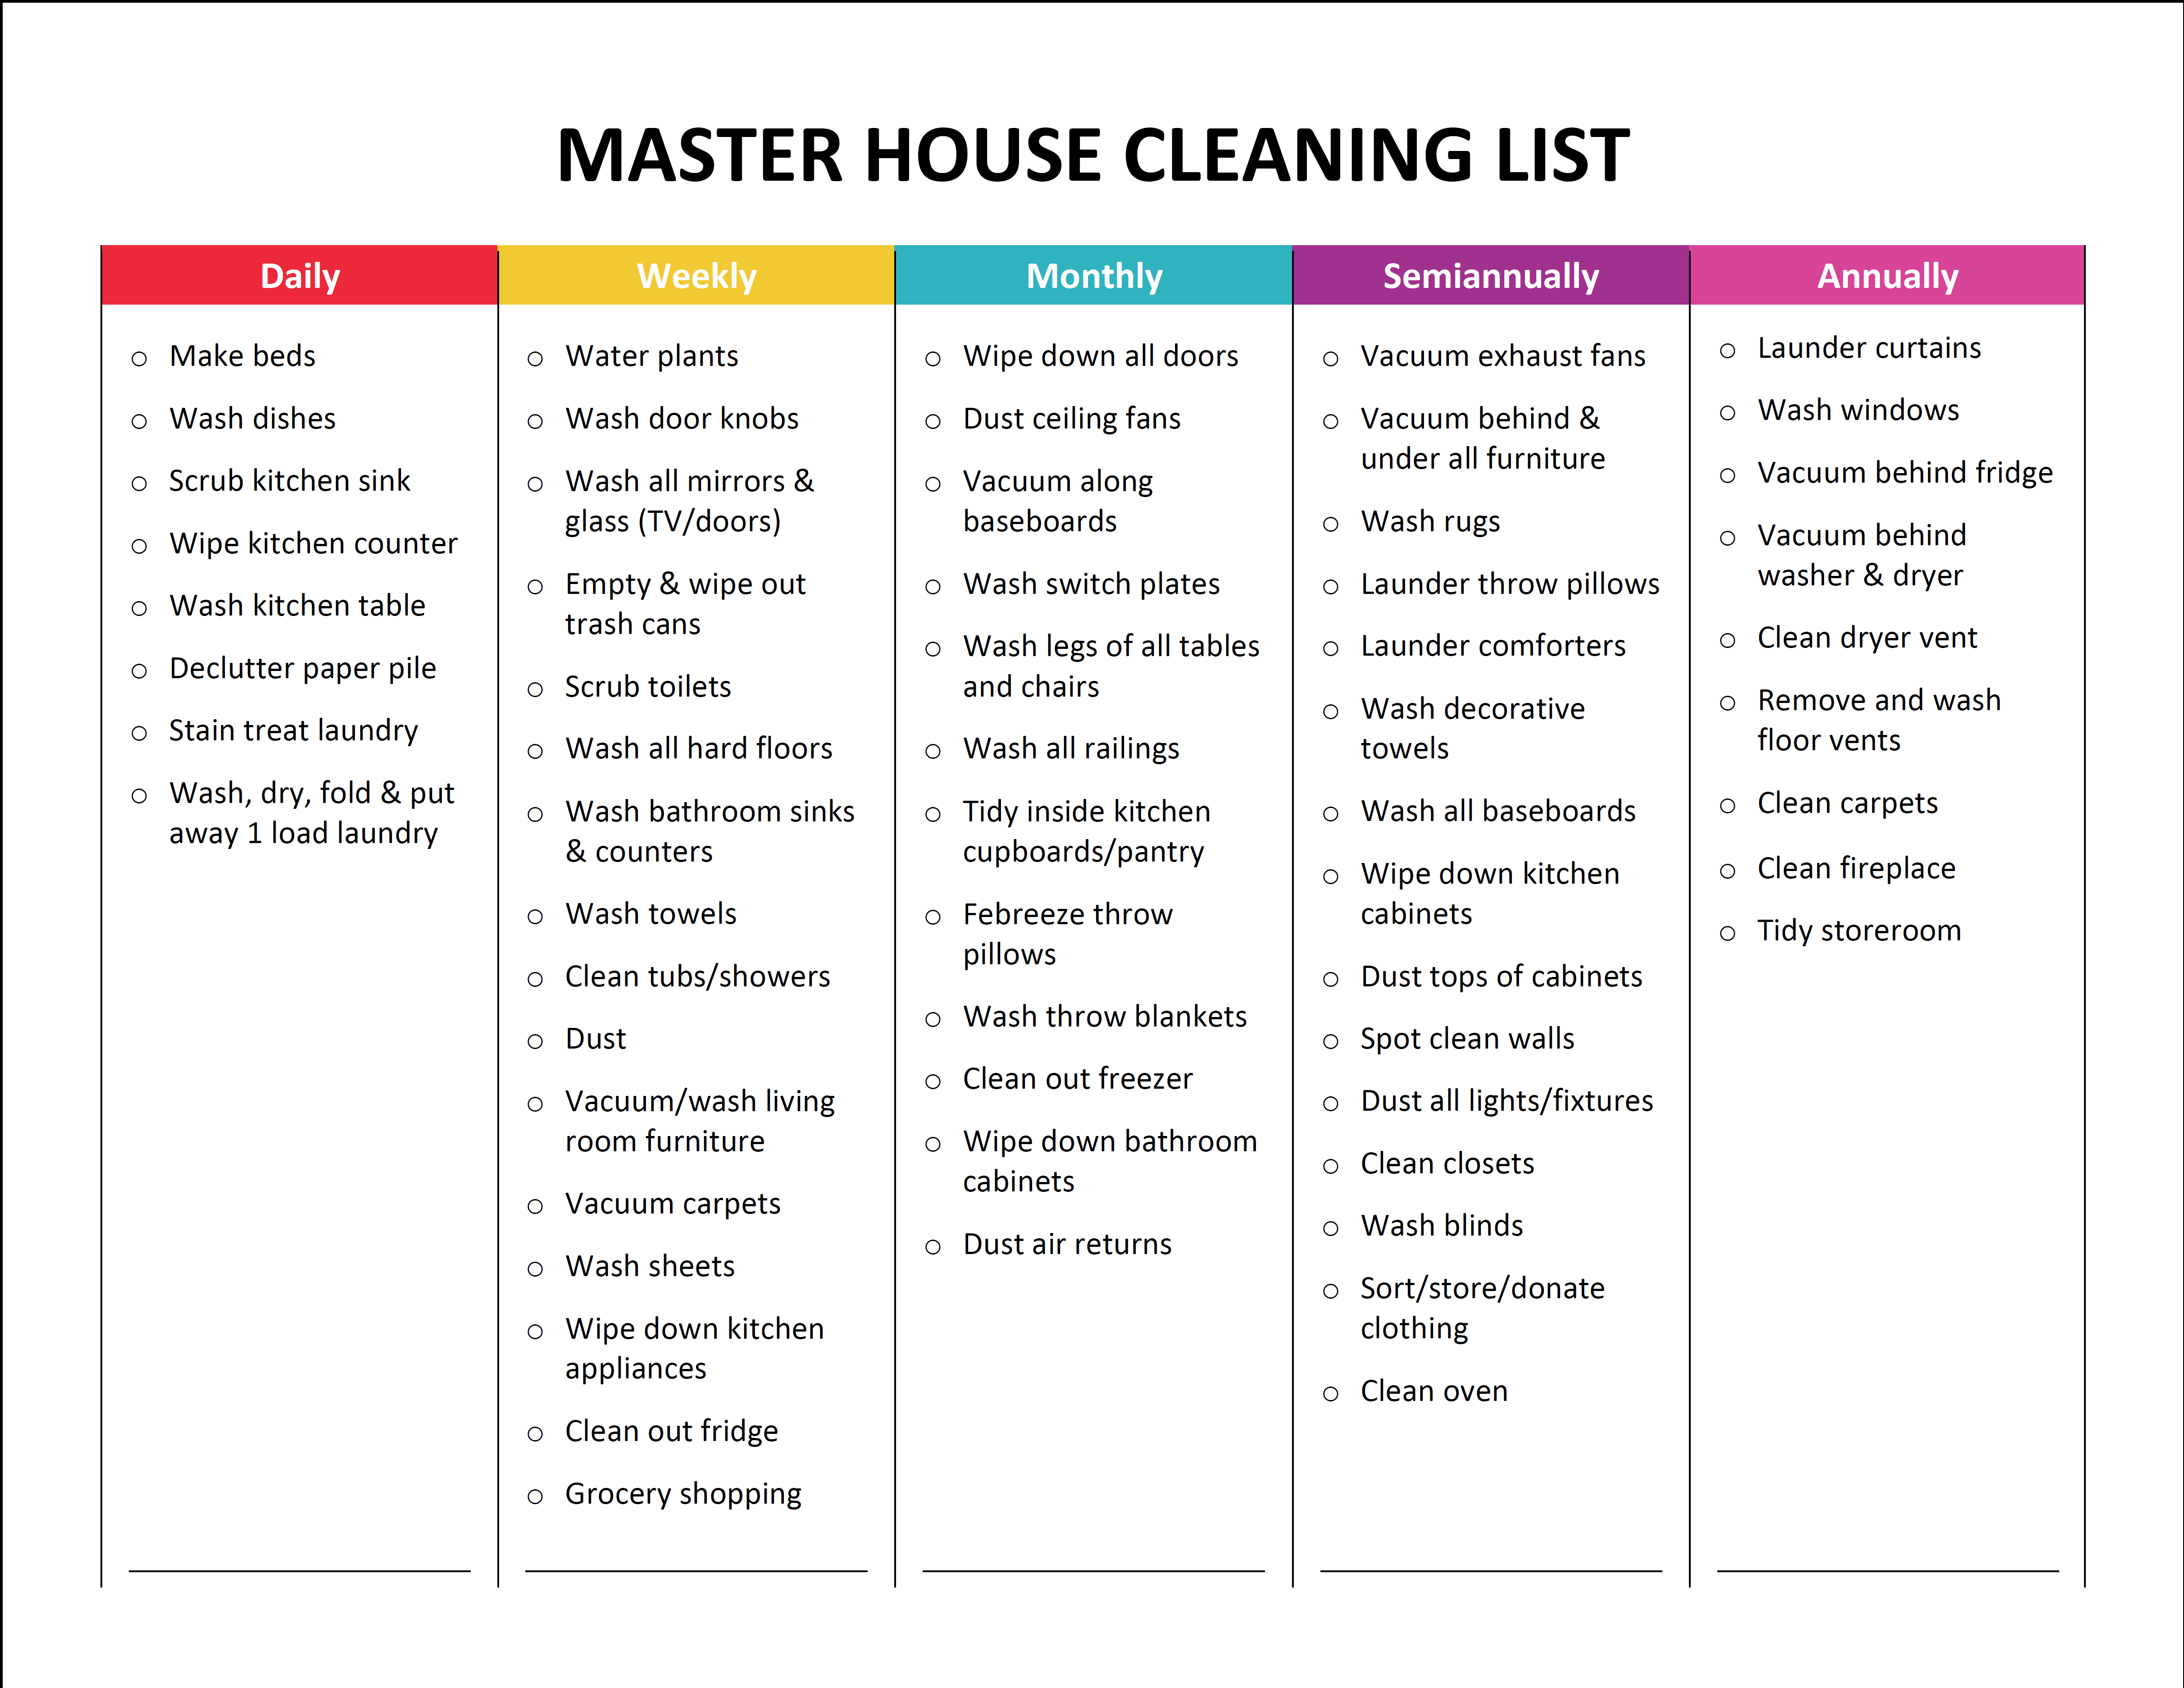 6-best-images-of-printable-master-cleaning-list-template-daily-house